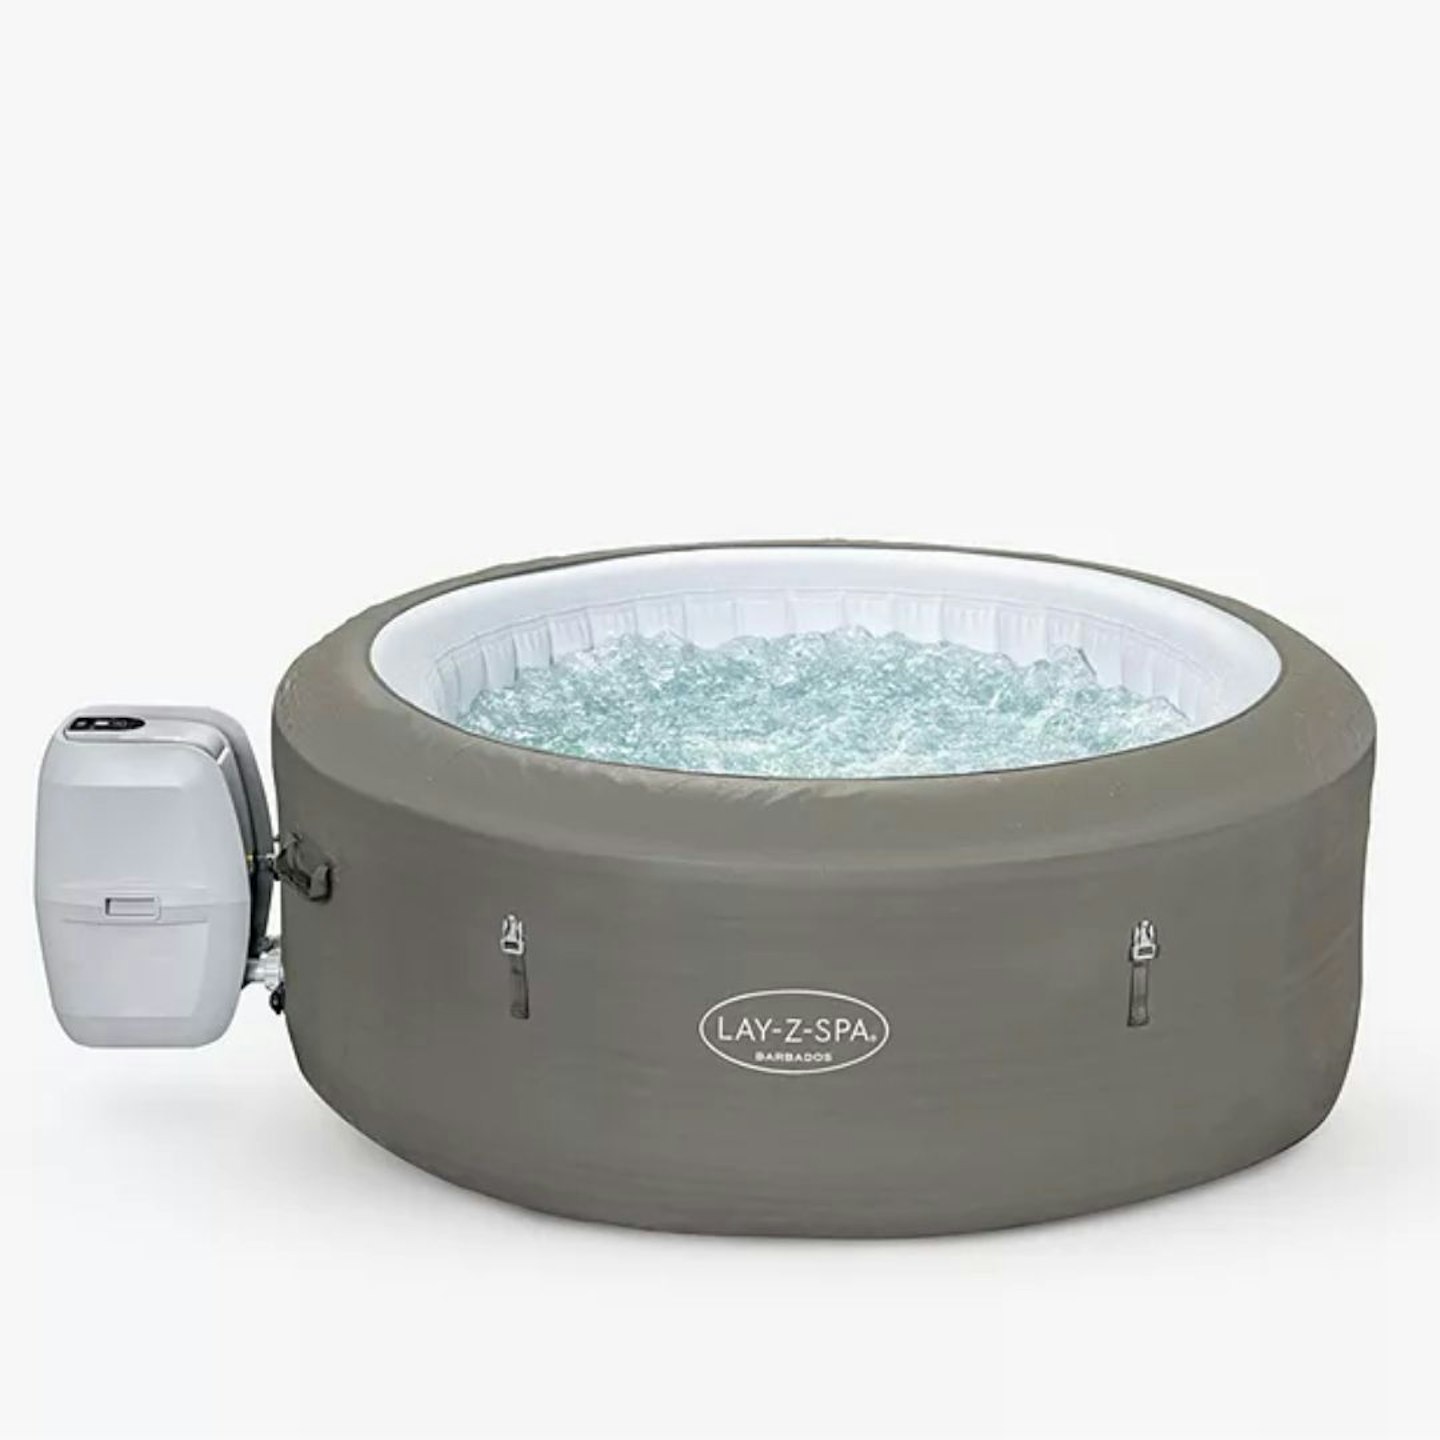 Lay-Z-Spa Barbados AirJet Round Inflatable Hot Tub